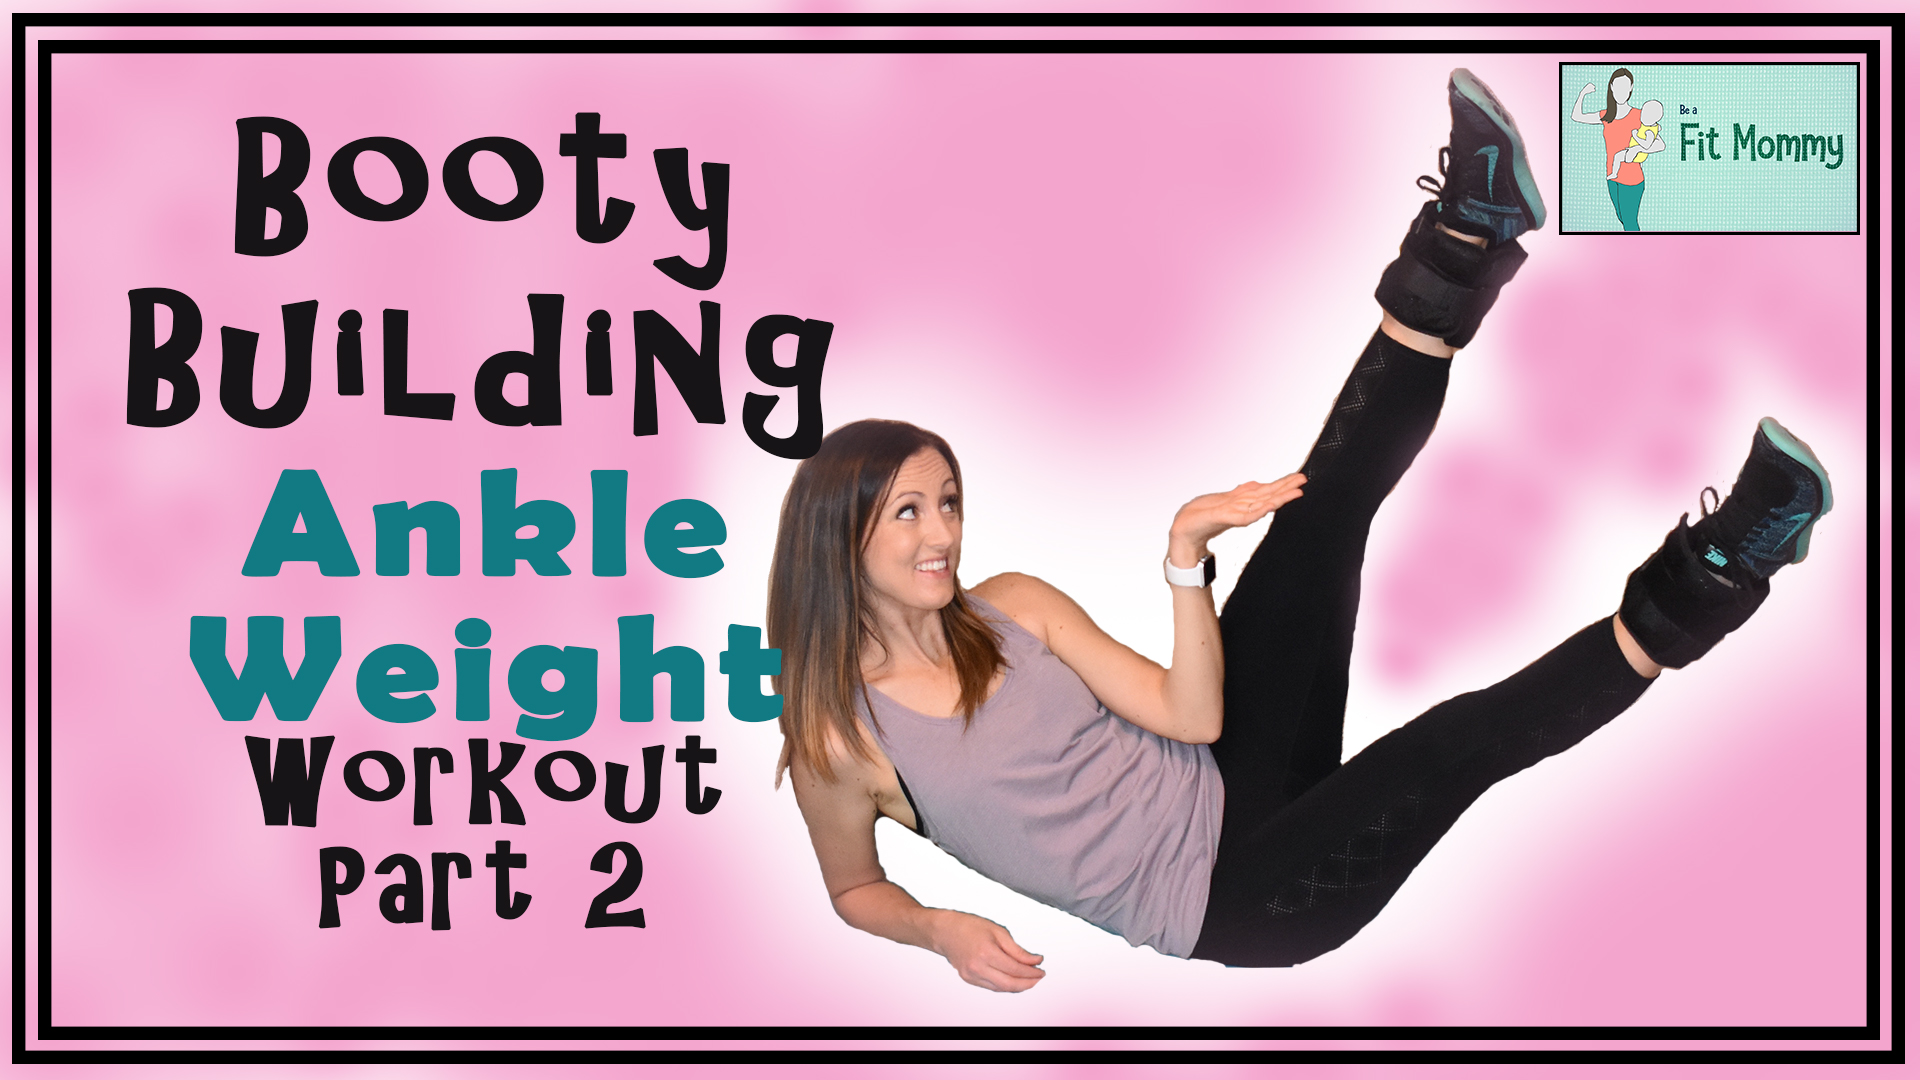 Booty workout with ankle weights